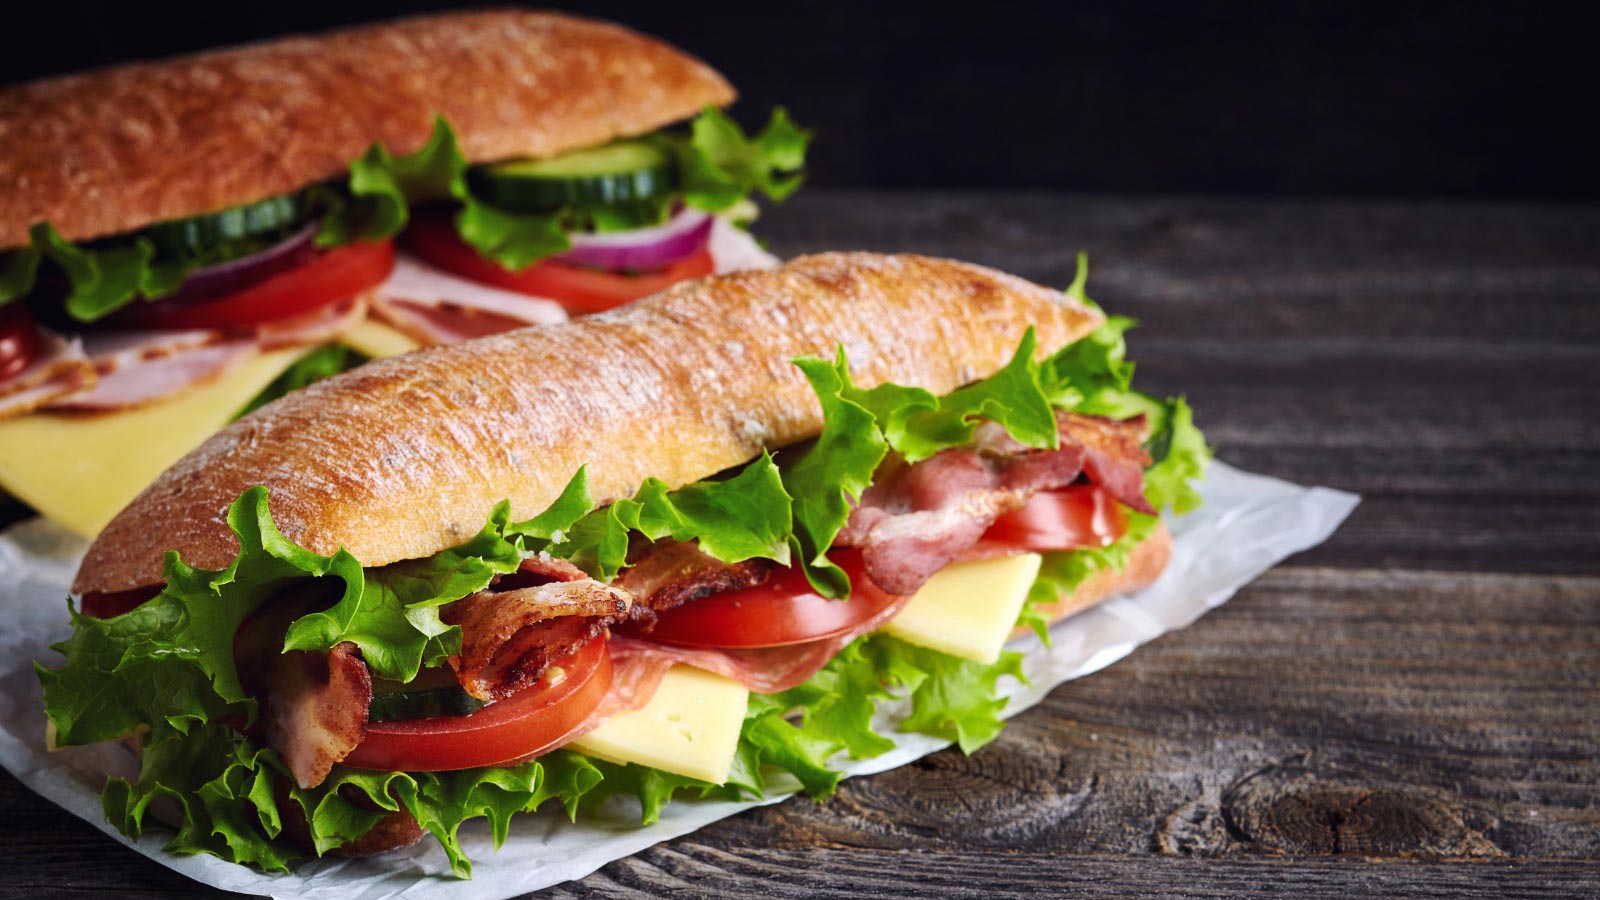 24 Sandwiches That Make Lunch Way More Exciting